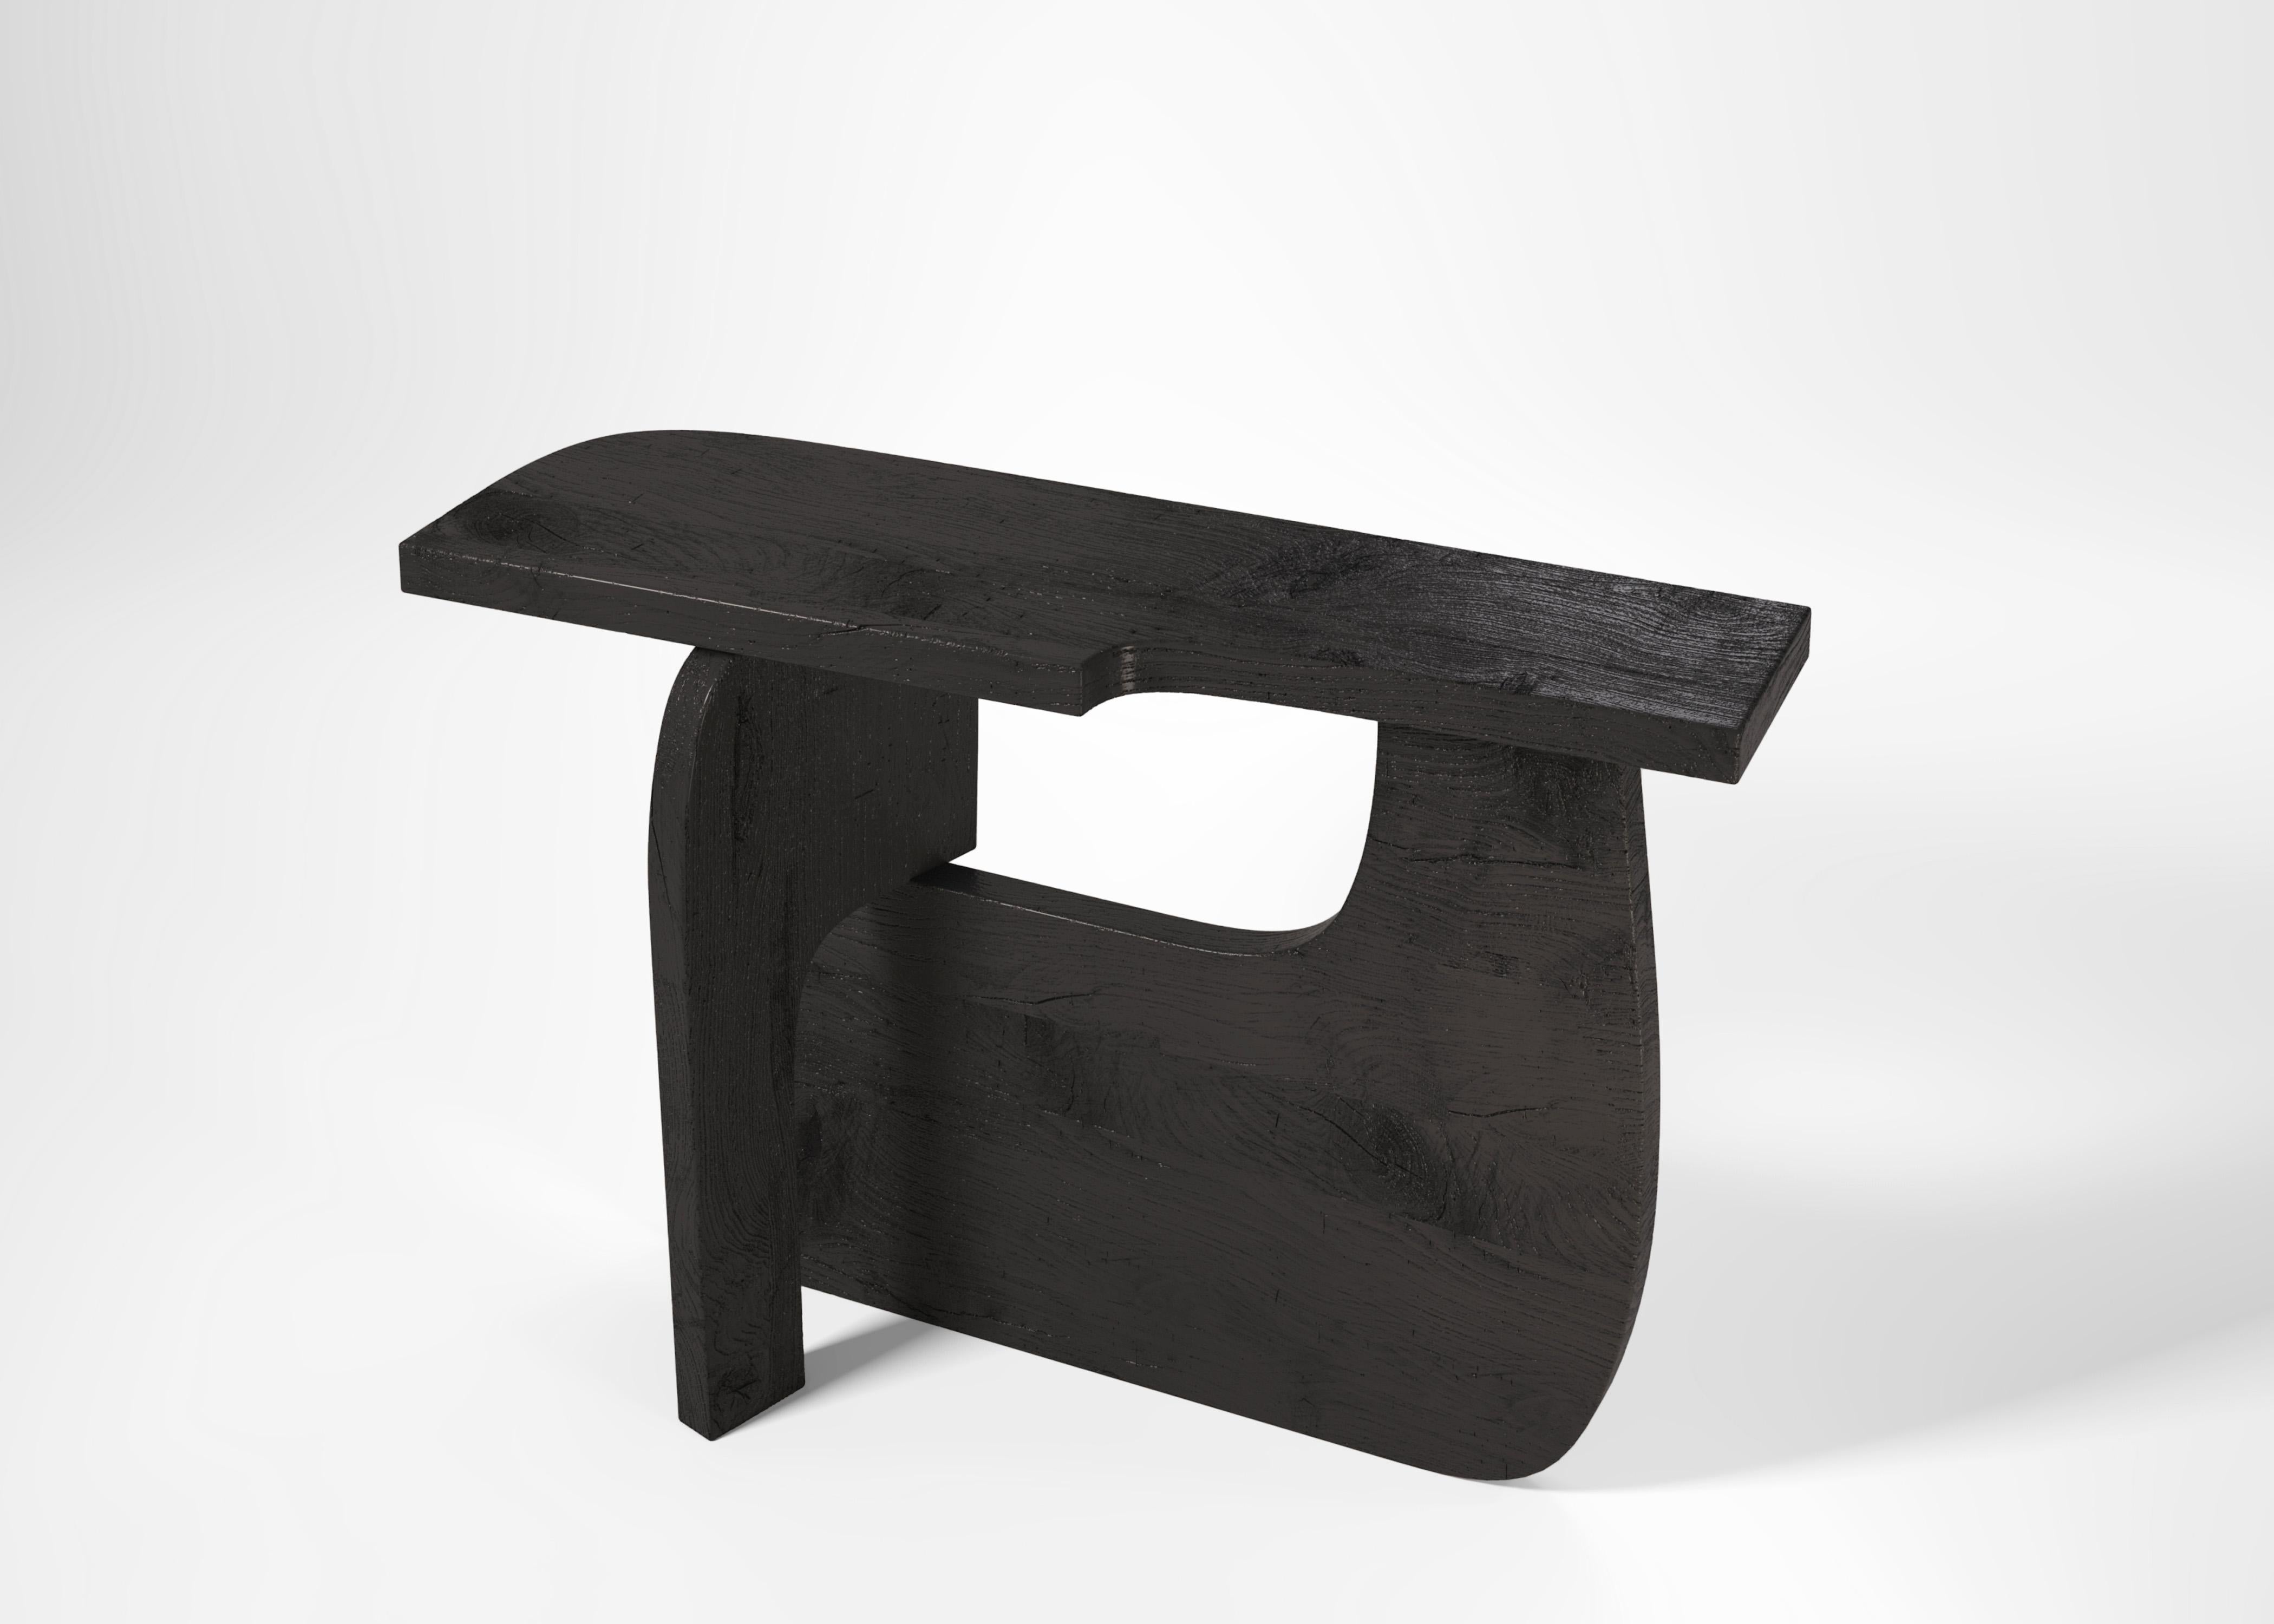 Reef console in charred wood by Edizione Limitata.
Limited Edition of 150 pieces. Signed and numbered.
Designers: Simone Fanciullacci.
Dimensions: H 90 × W 40 × L 130 cm.
Materials: Charred wood.

Edizione Limitata, that is to say “Limited Edition”,